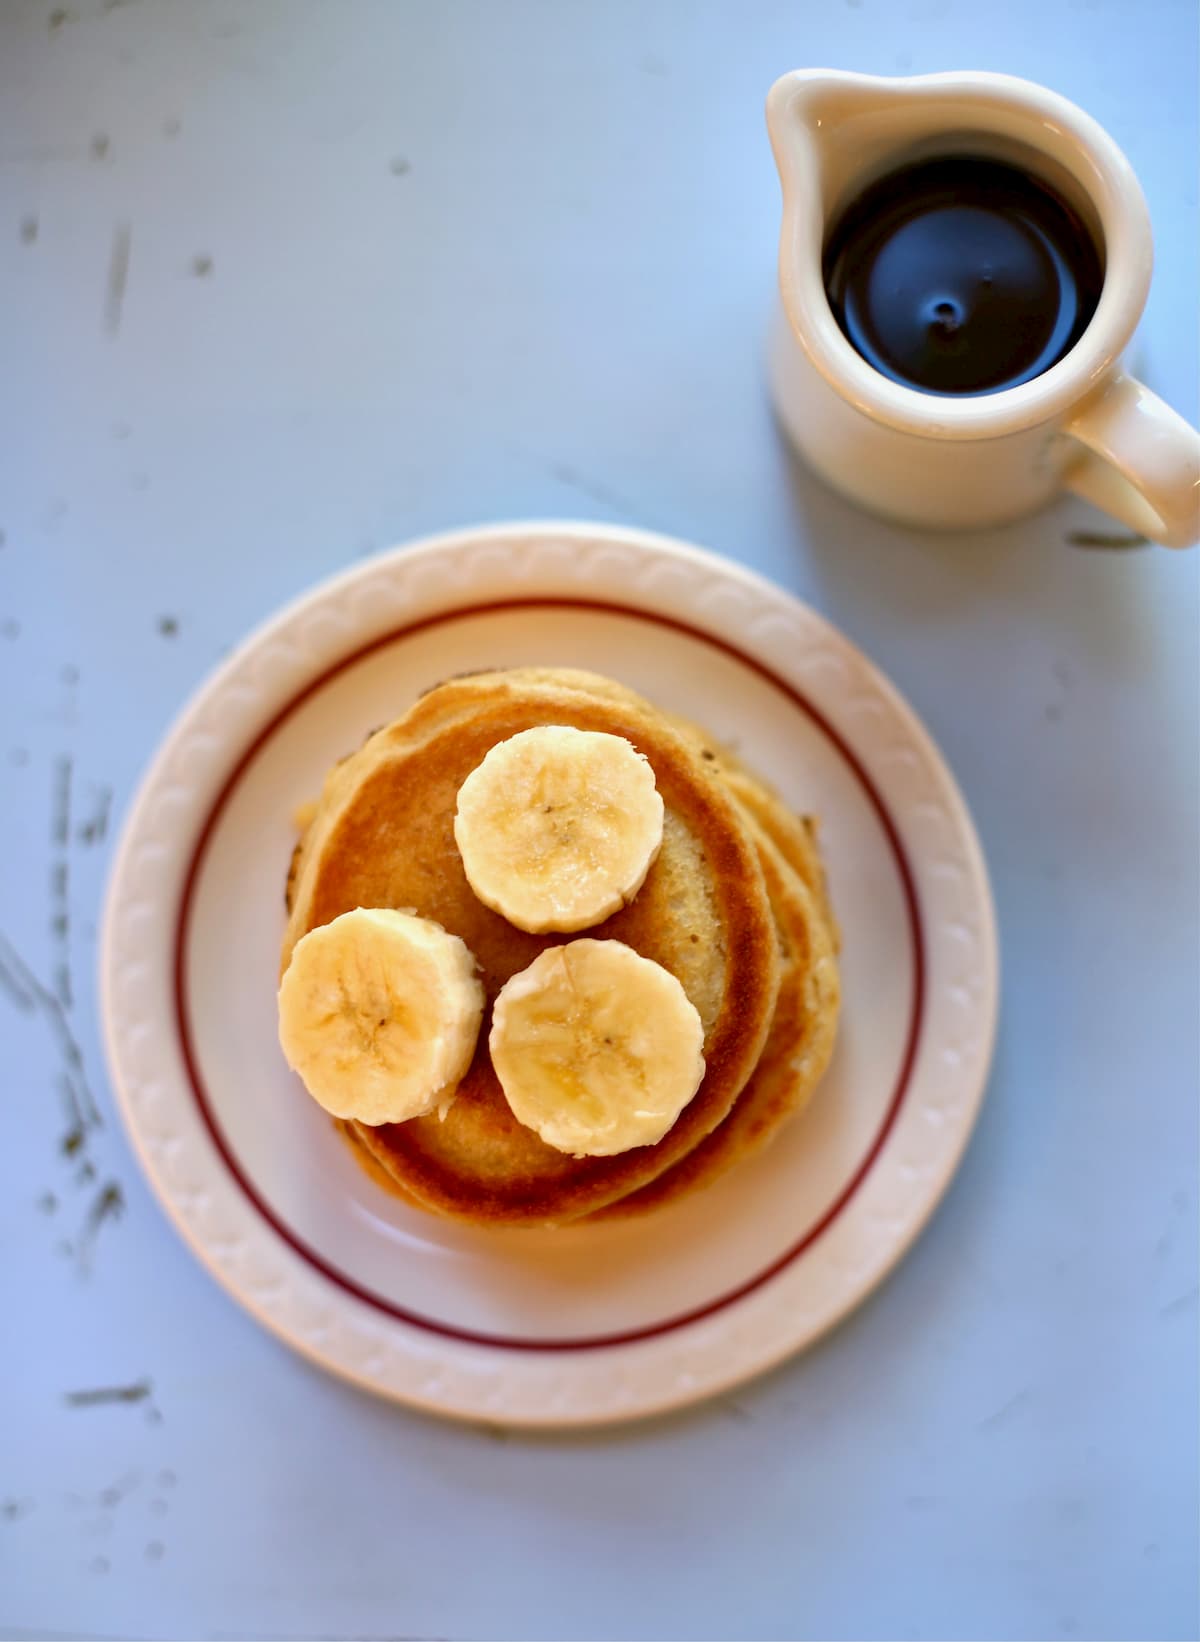 pancakes with bananas and syrup